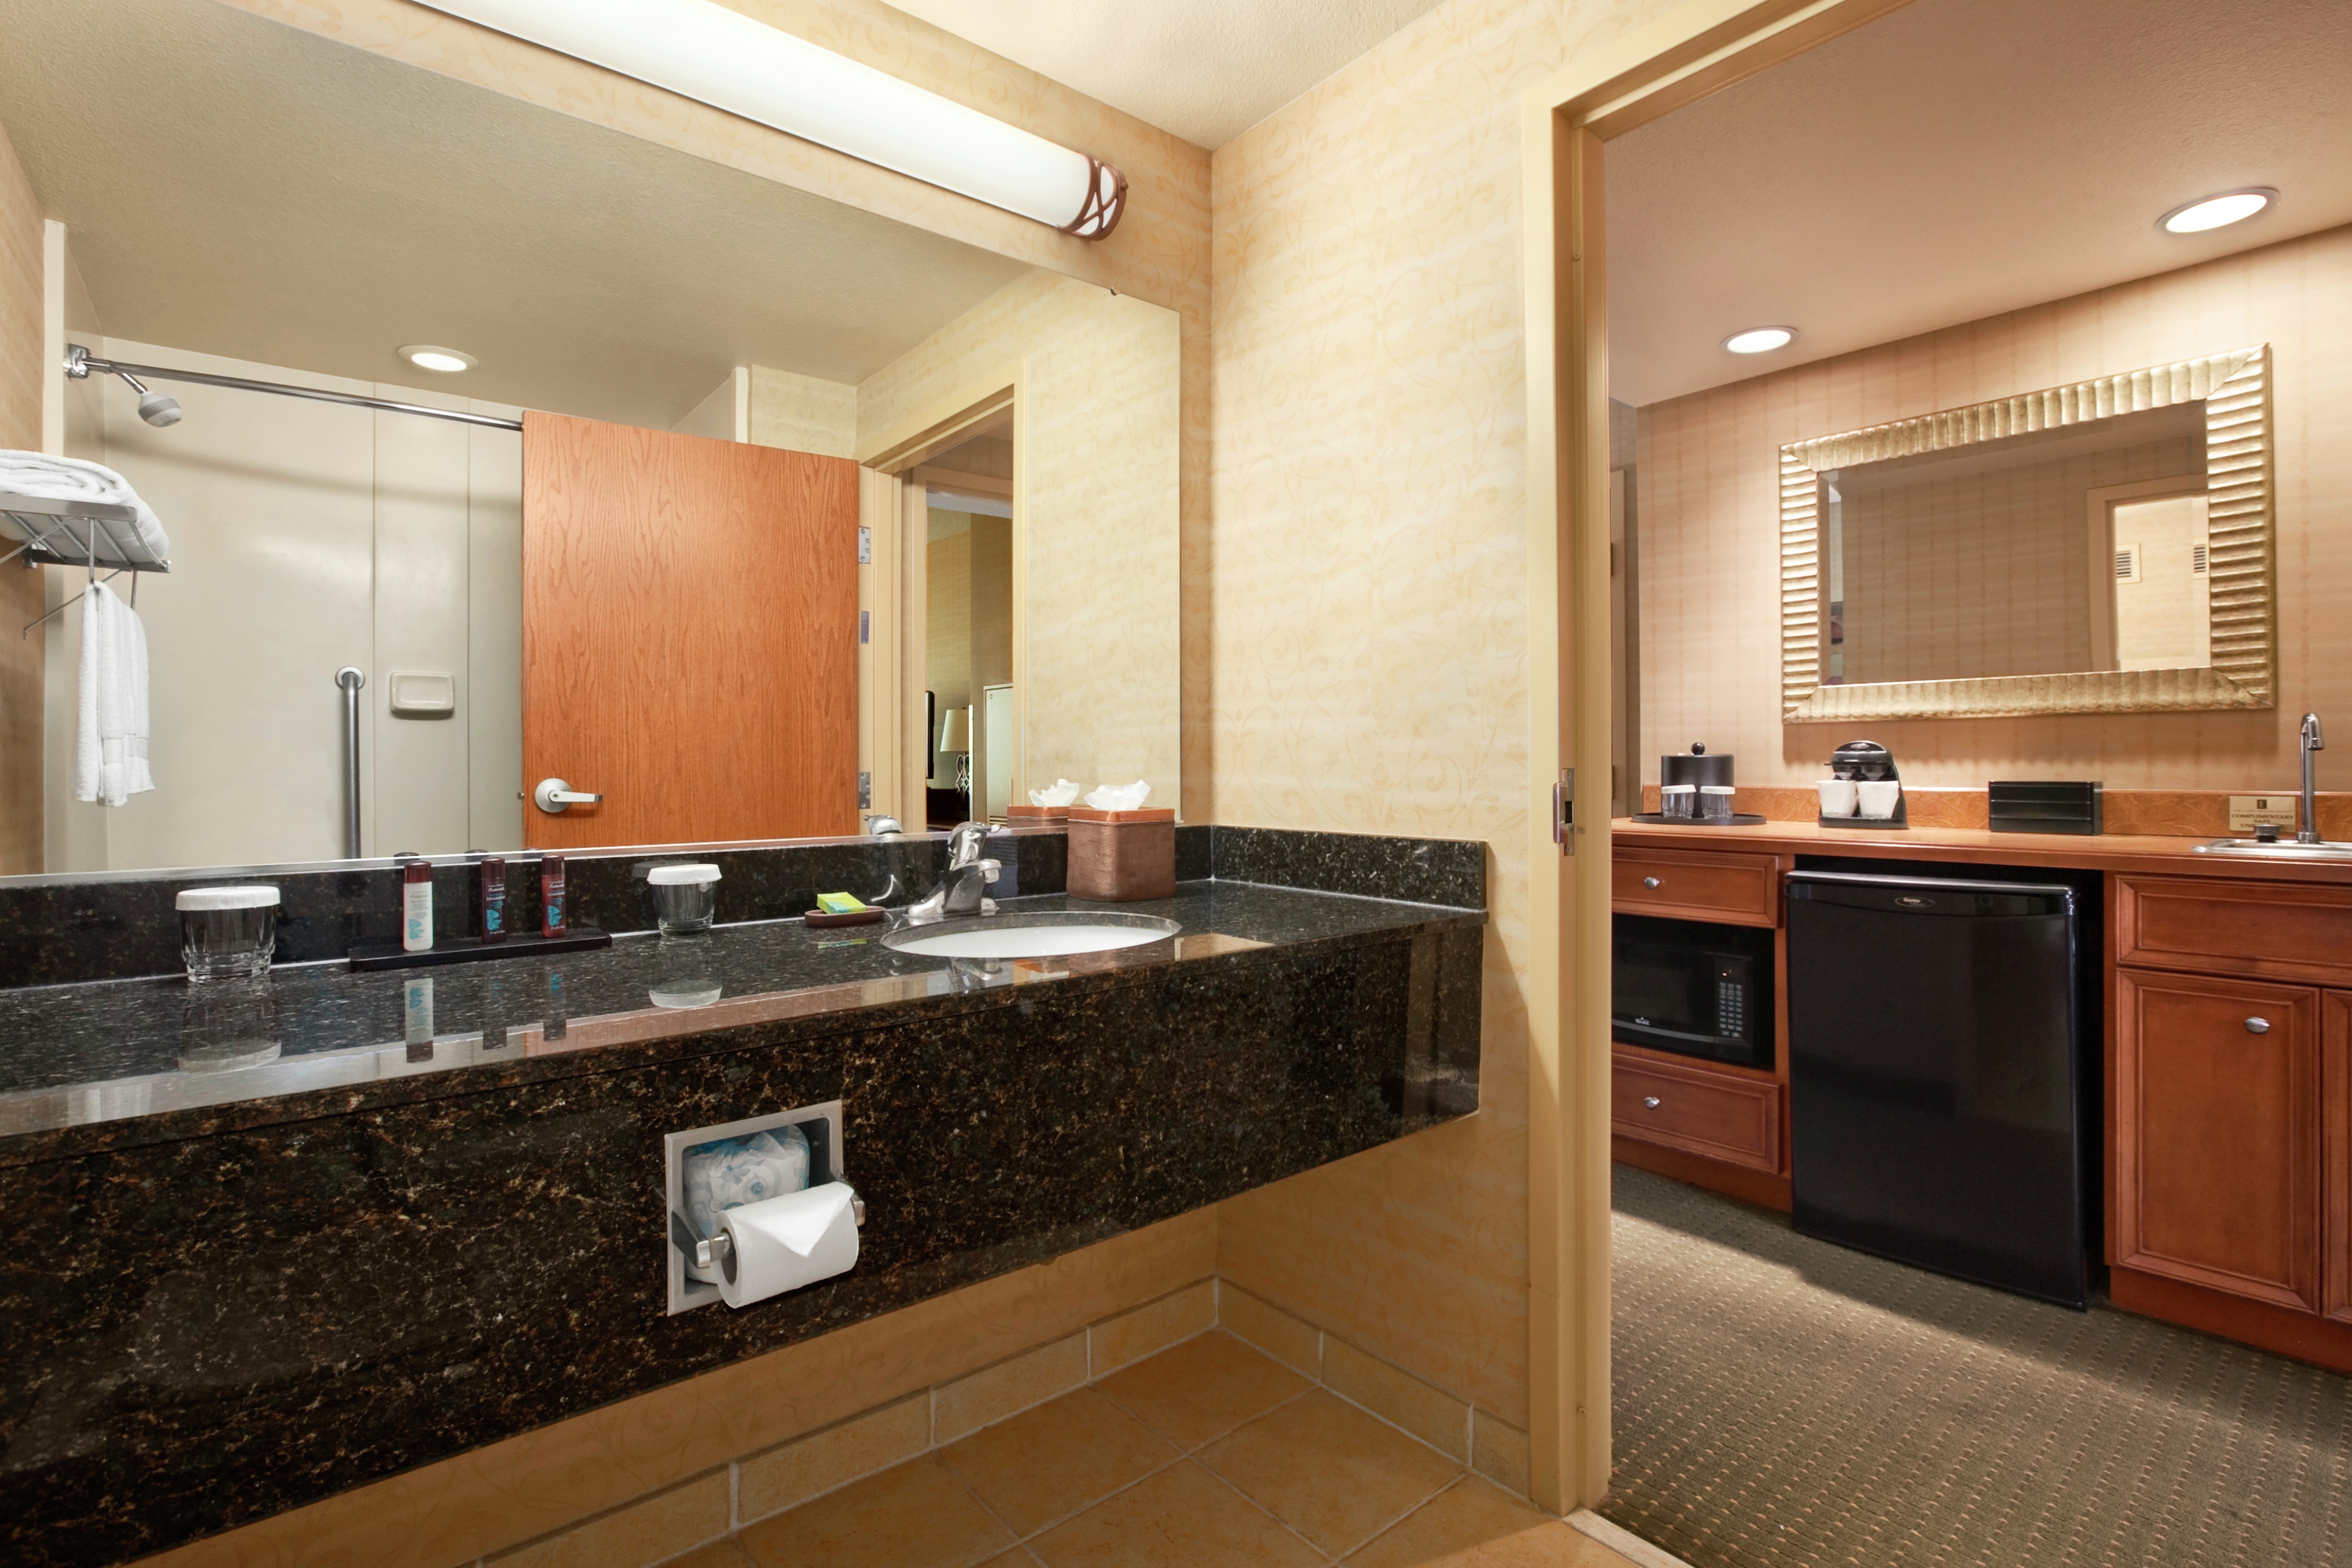 View of Bathroom and Wetbar